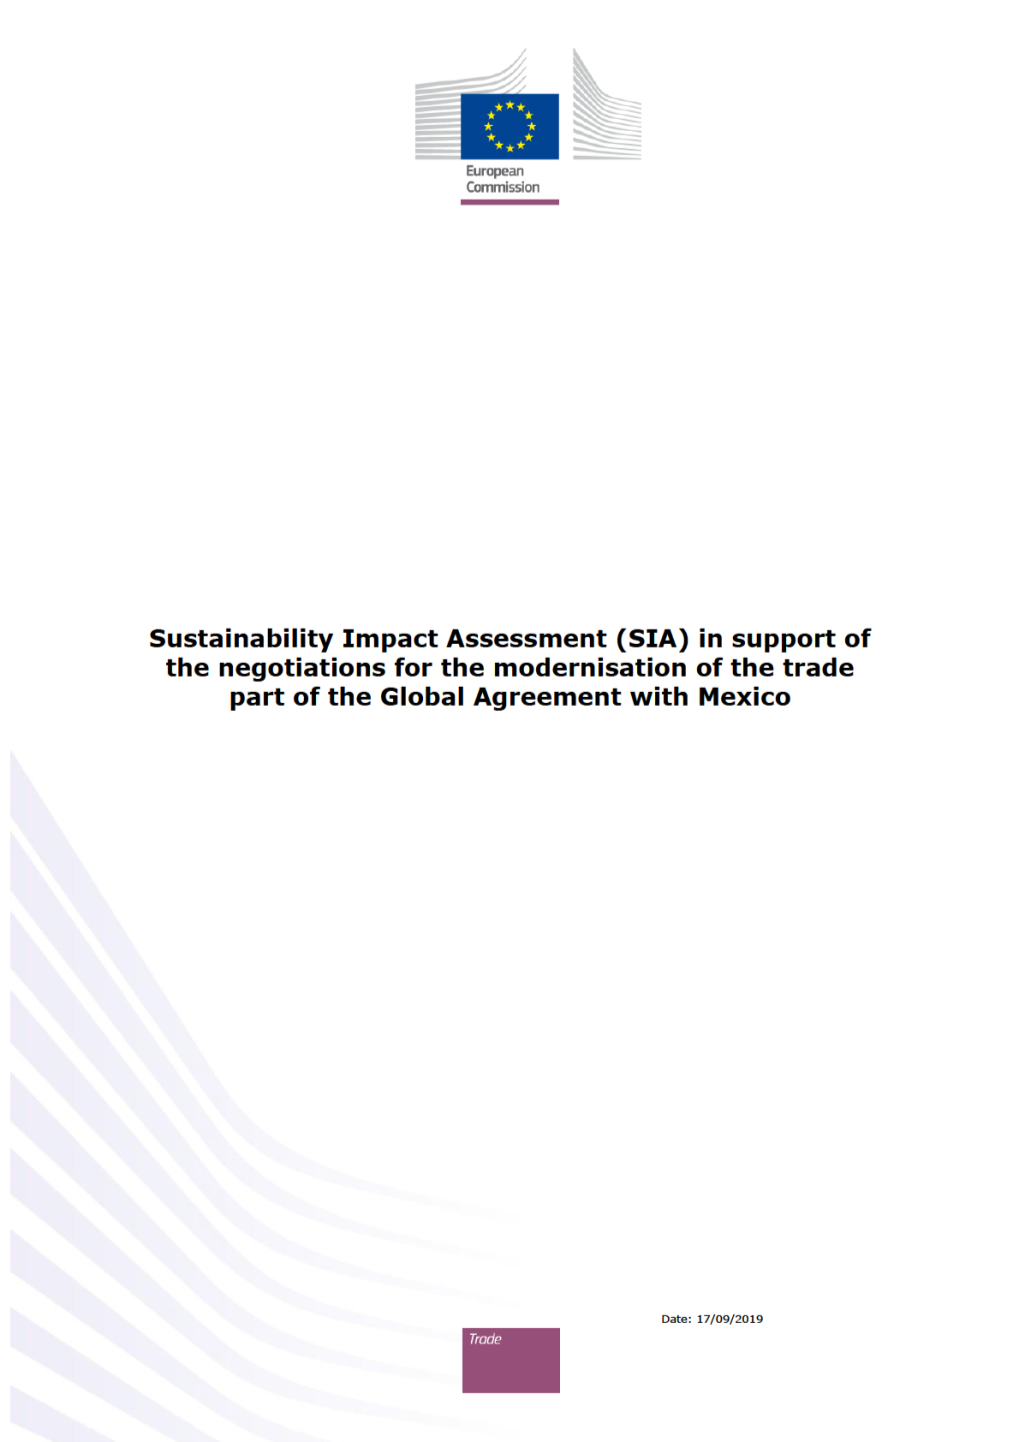 Sustainability Impact Assessment (SIA) in Support of the Negotiations for the Modernisation of the Trade Part of the Global Agreement with Mexico